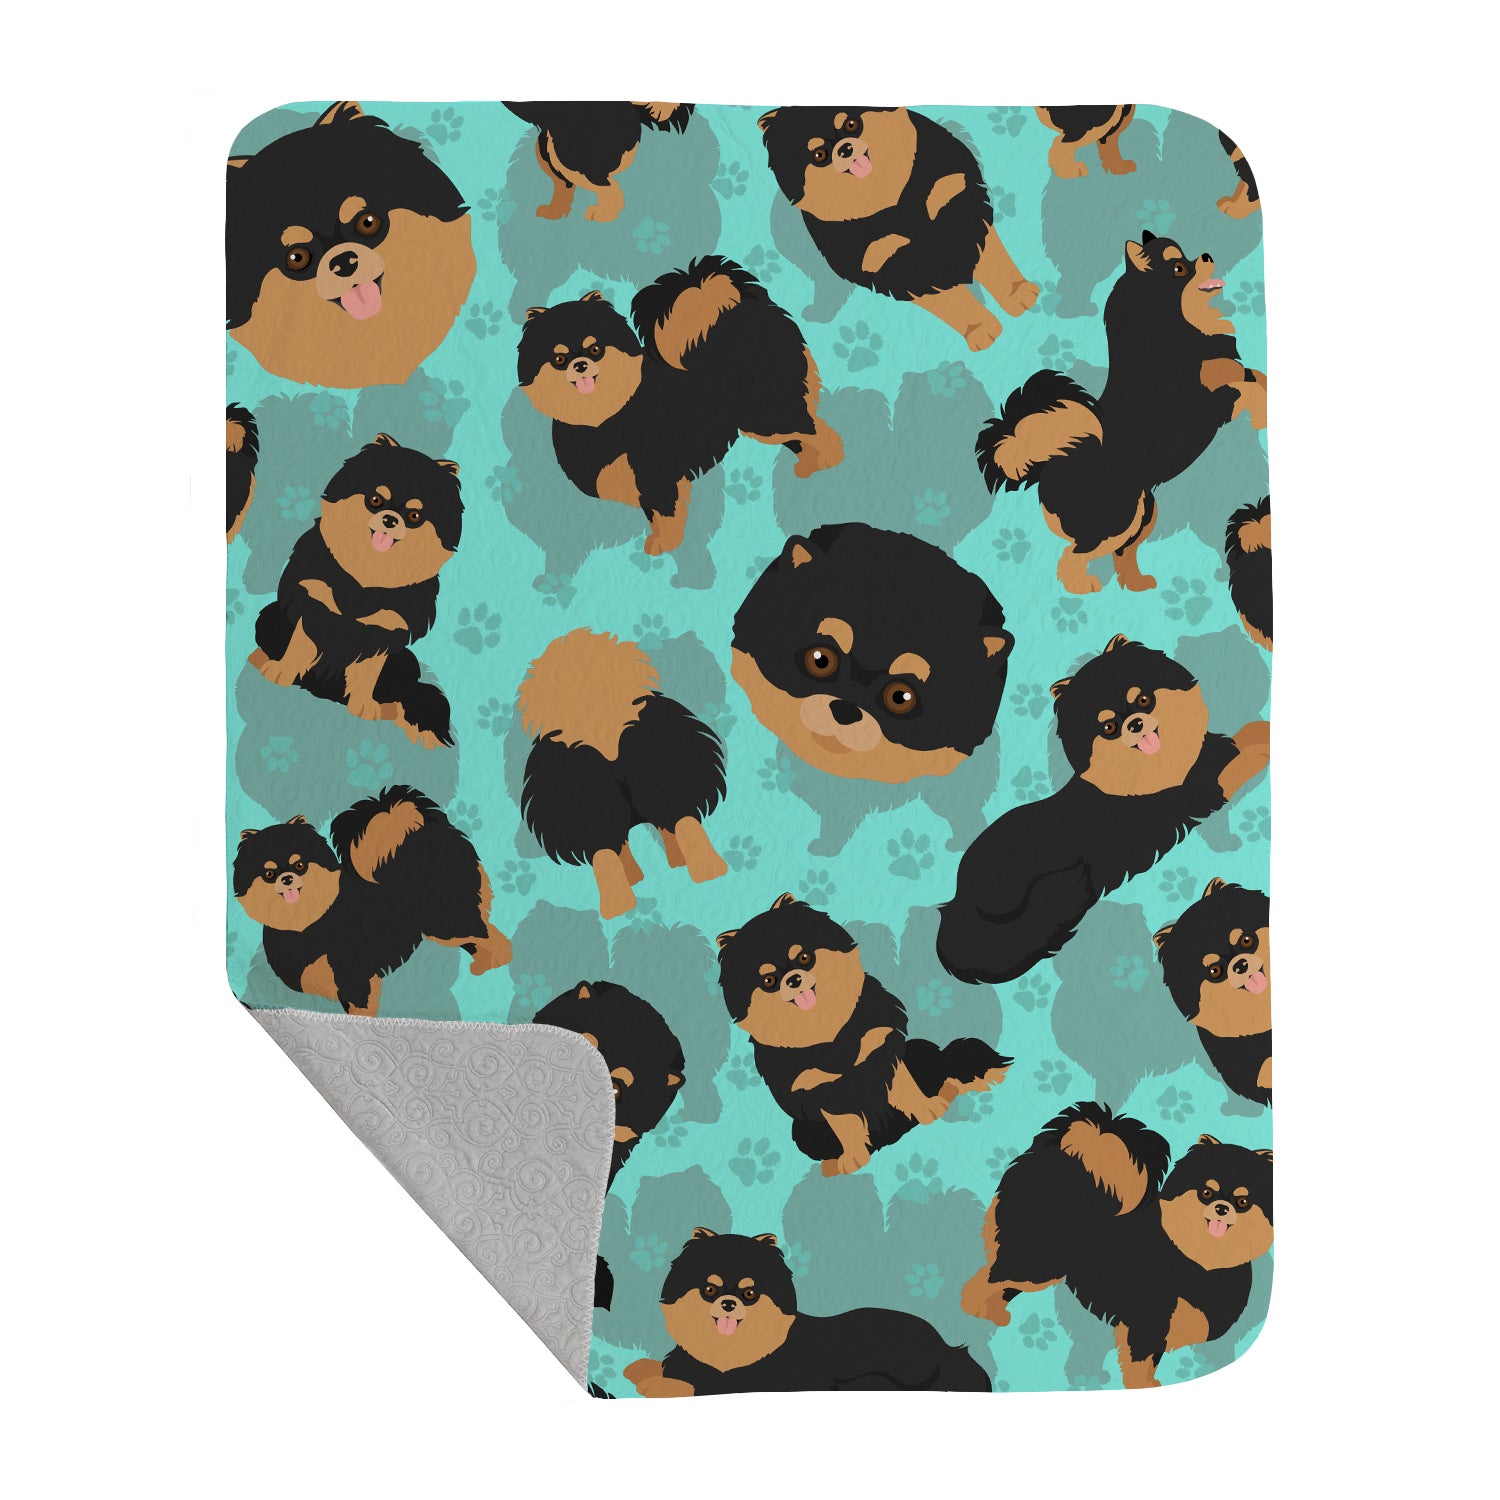 Buy this Black and Tan Pomeranian Quilted Blanket 50x60